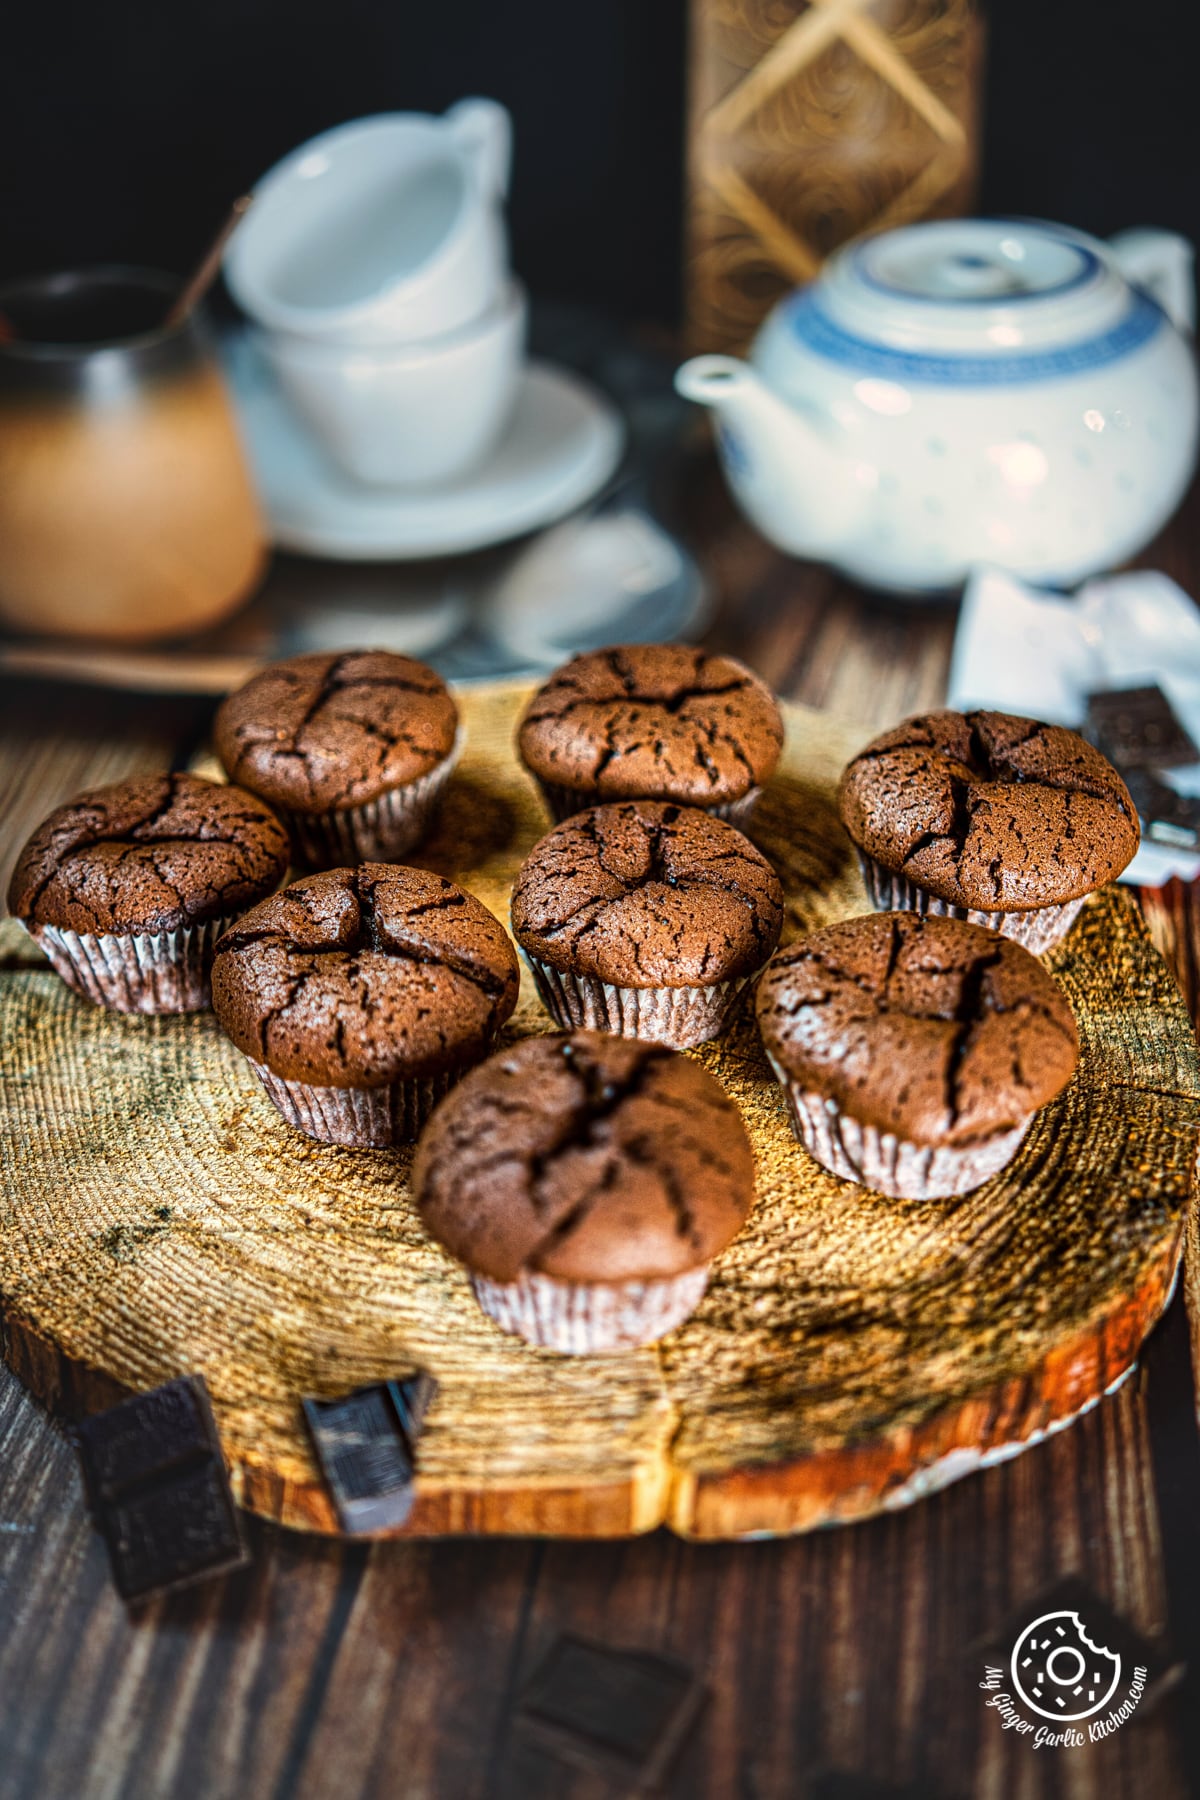 seven pieces of 2 ingredient chocolate muffins on a natural wooden log with some chocolate pieces on the side